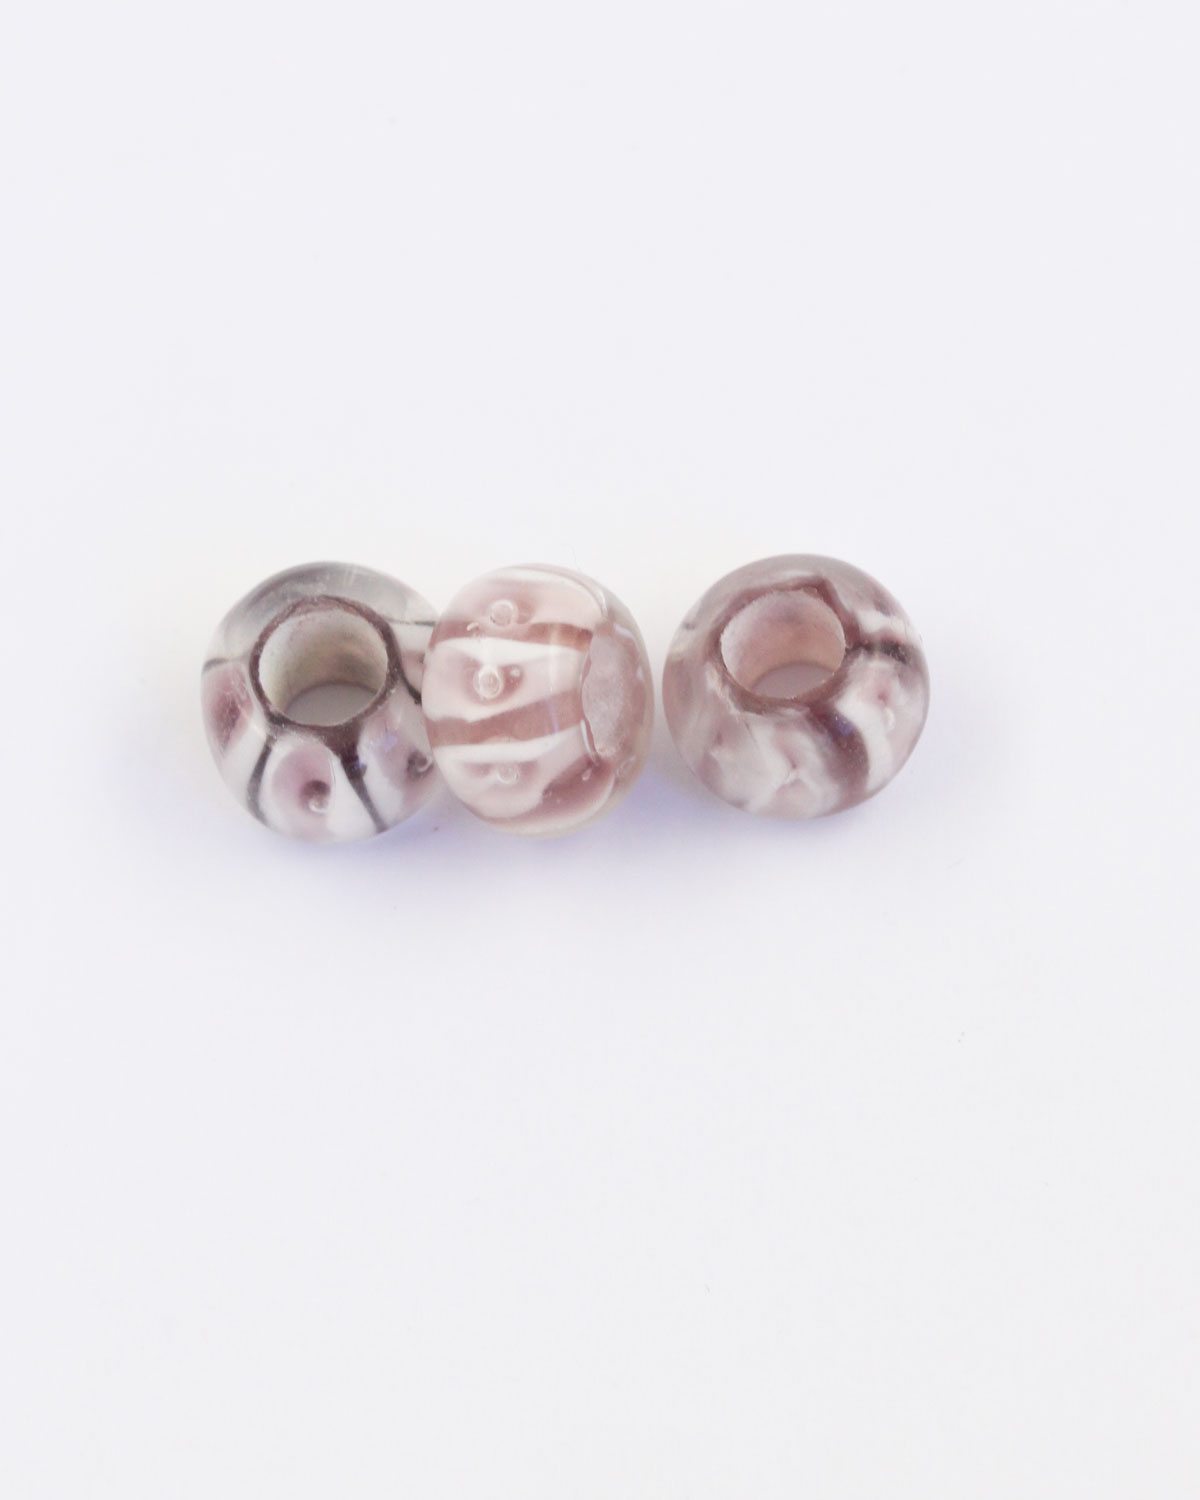 Large hole glass bead Amethyst and white flowers